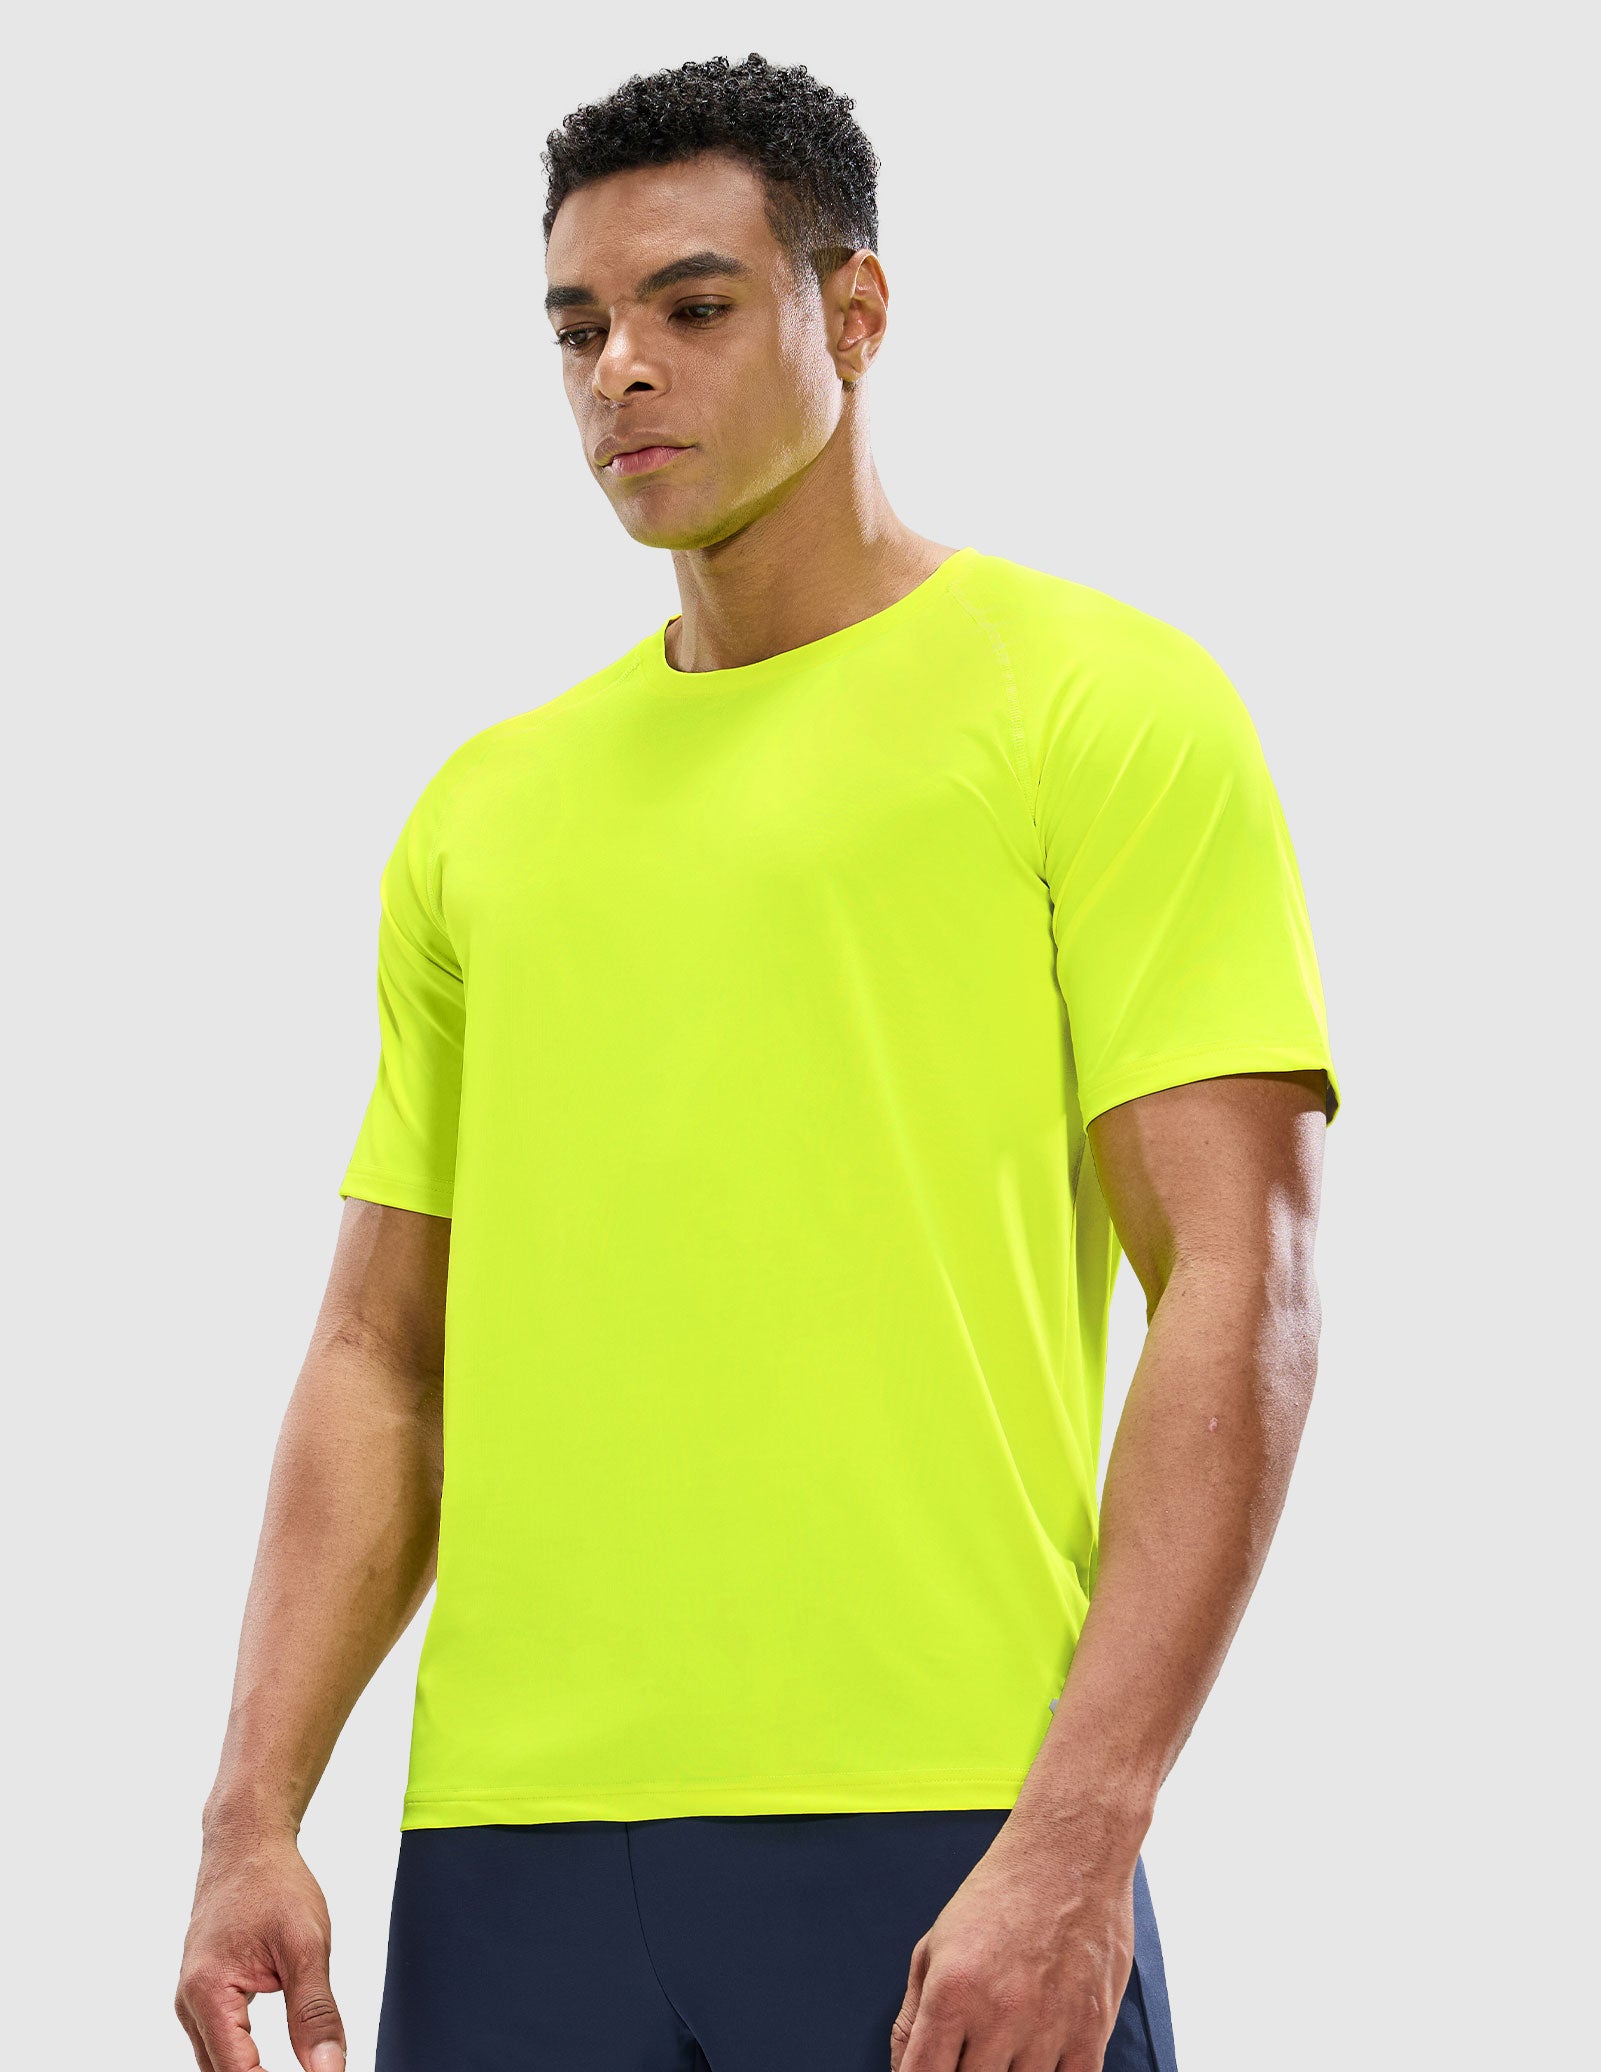 Men's Workout T-Shirts Dry Fit Athletic Running Tee